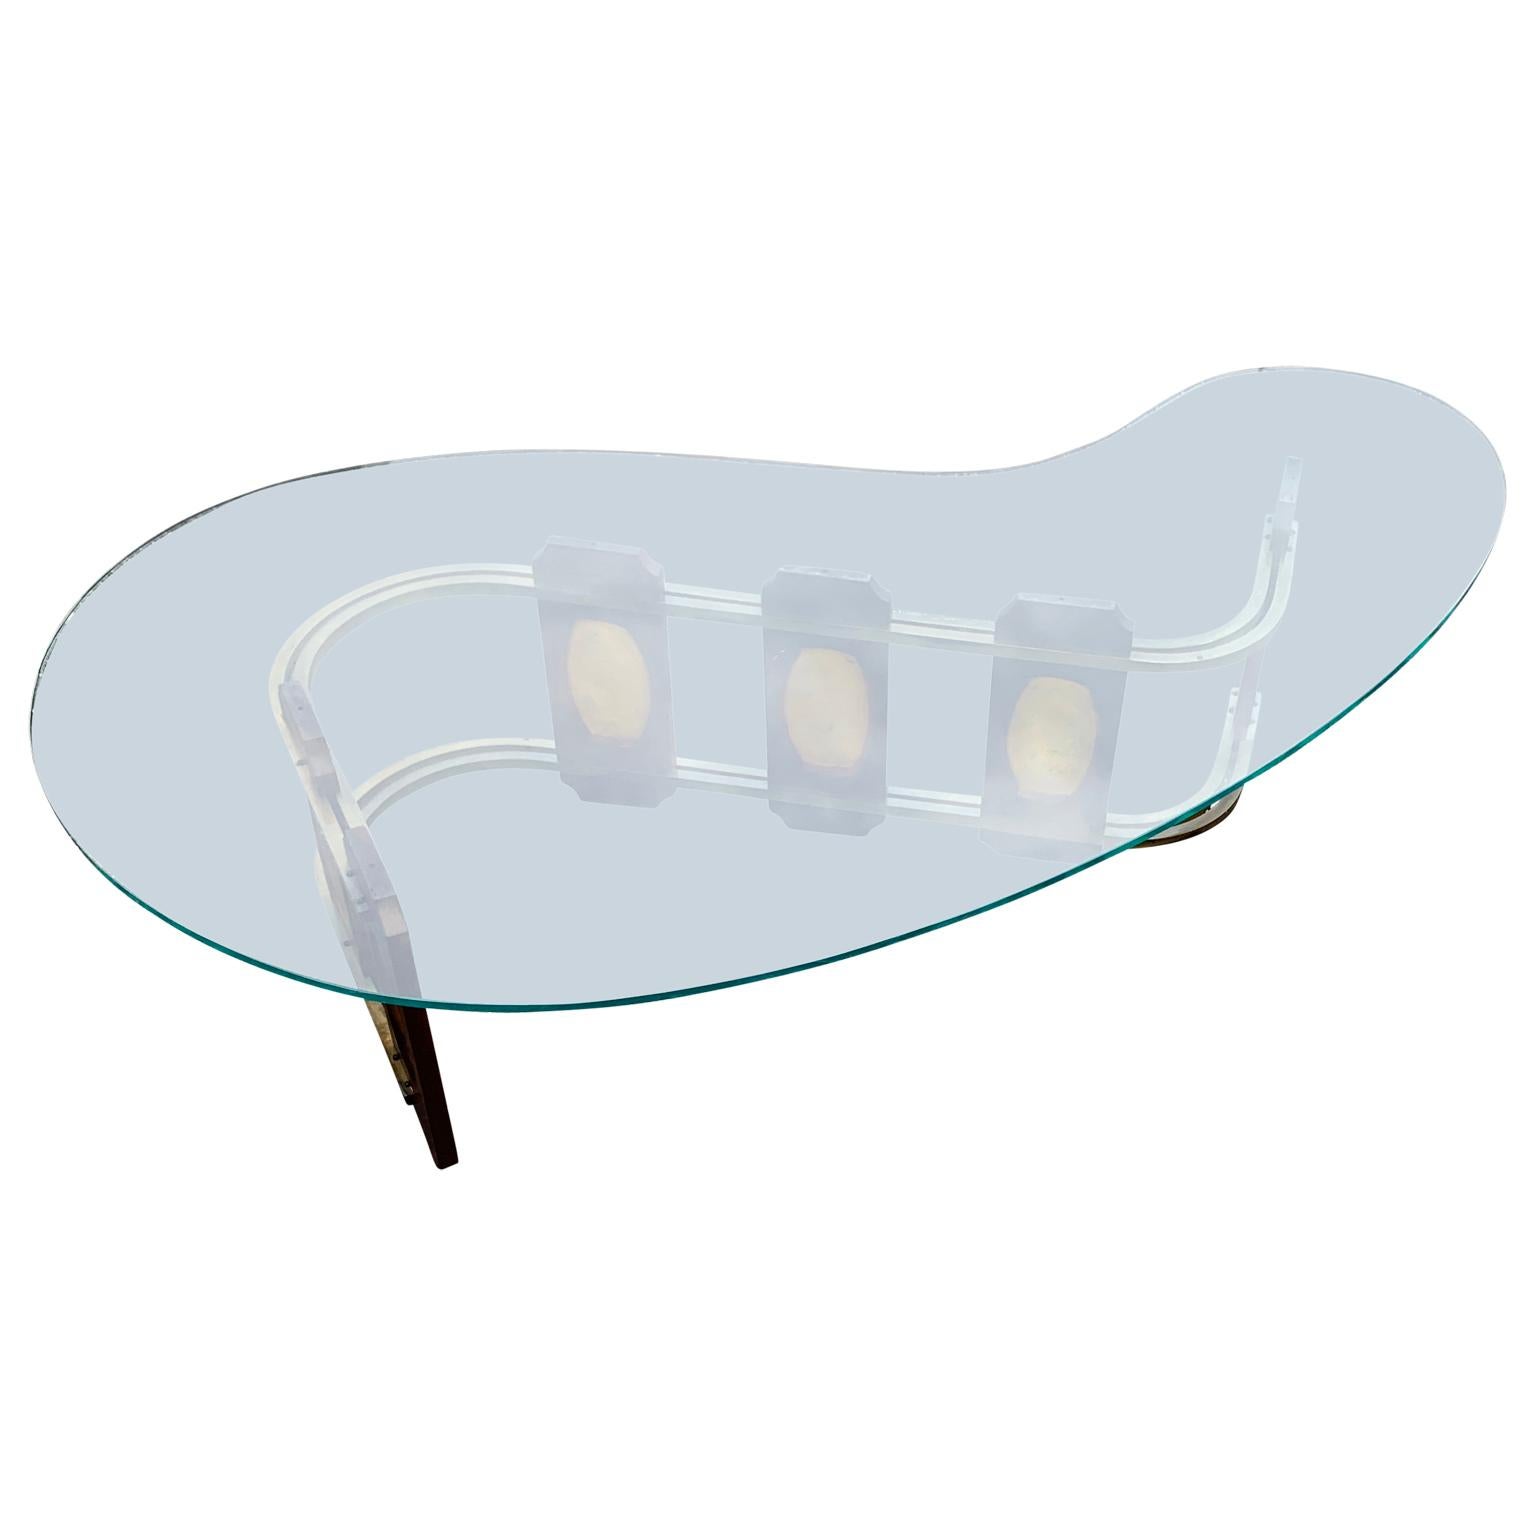 Mid-Century Modern sculptural vintage kidney shaped coffee cocktail table

Measurements listed are of the actual table base, not the kidney shaped glass-top.
The kidney glass-top measures W36